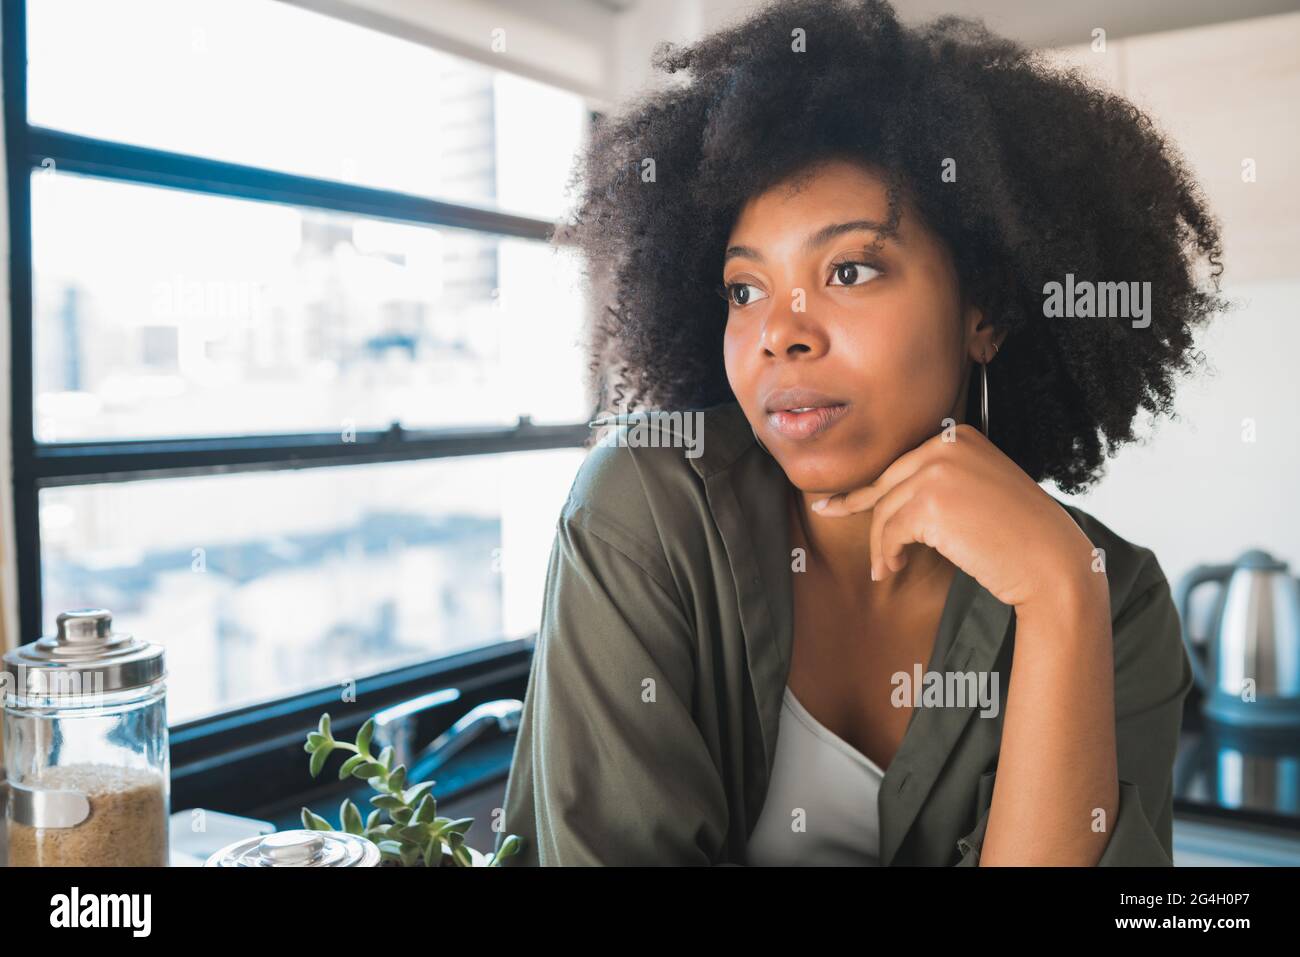 Afro woman relaxing at home. Stock Photo